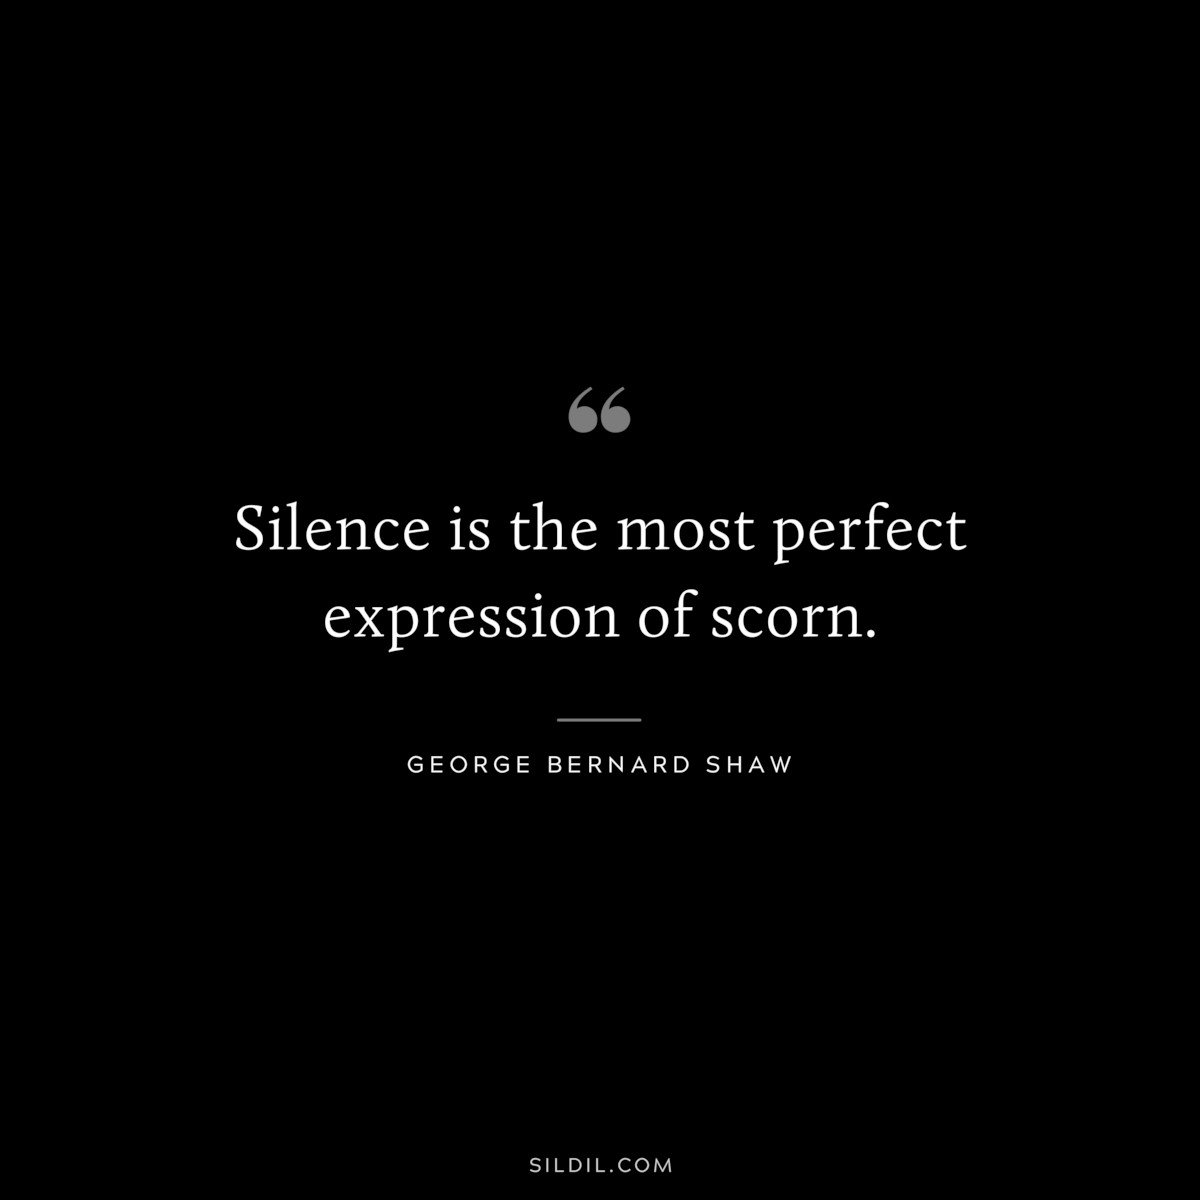 Silence is the most perfect expression of scorn. ― George Bernard Shaw